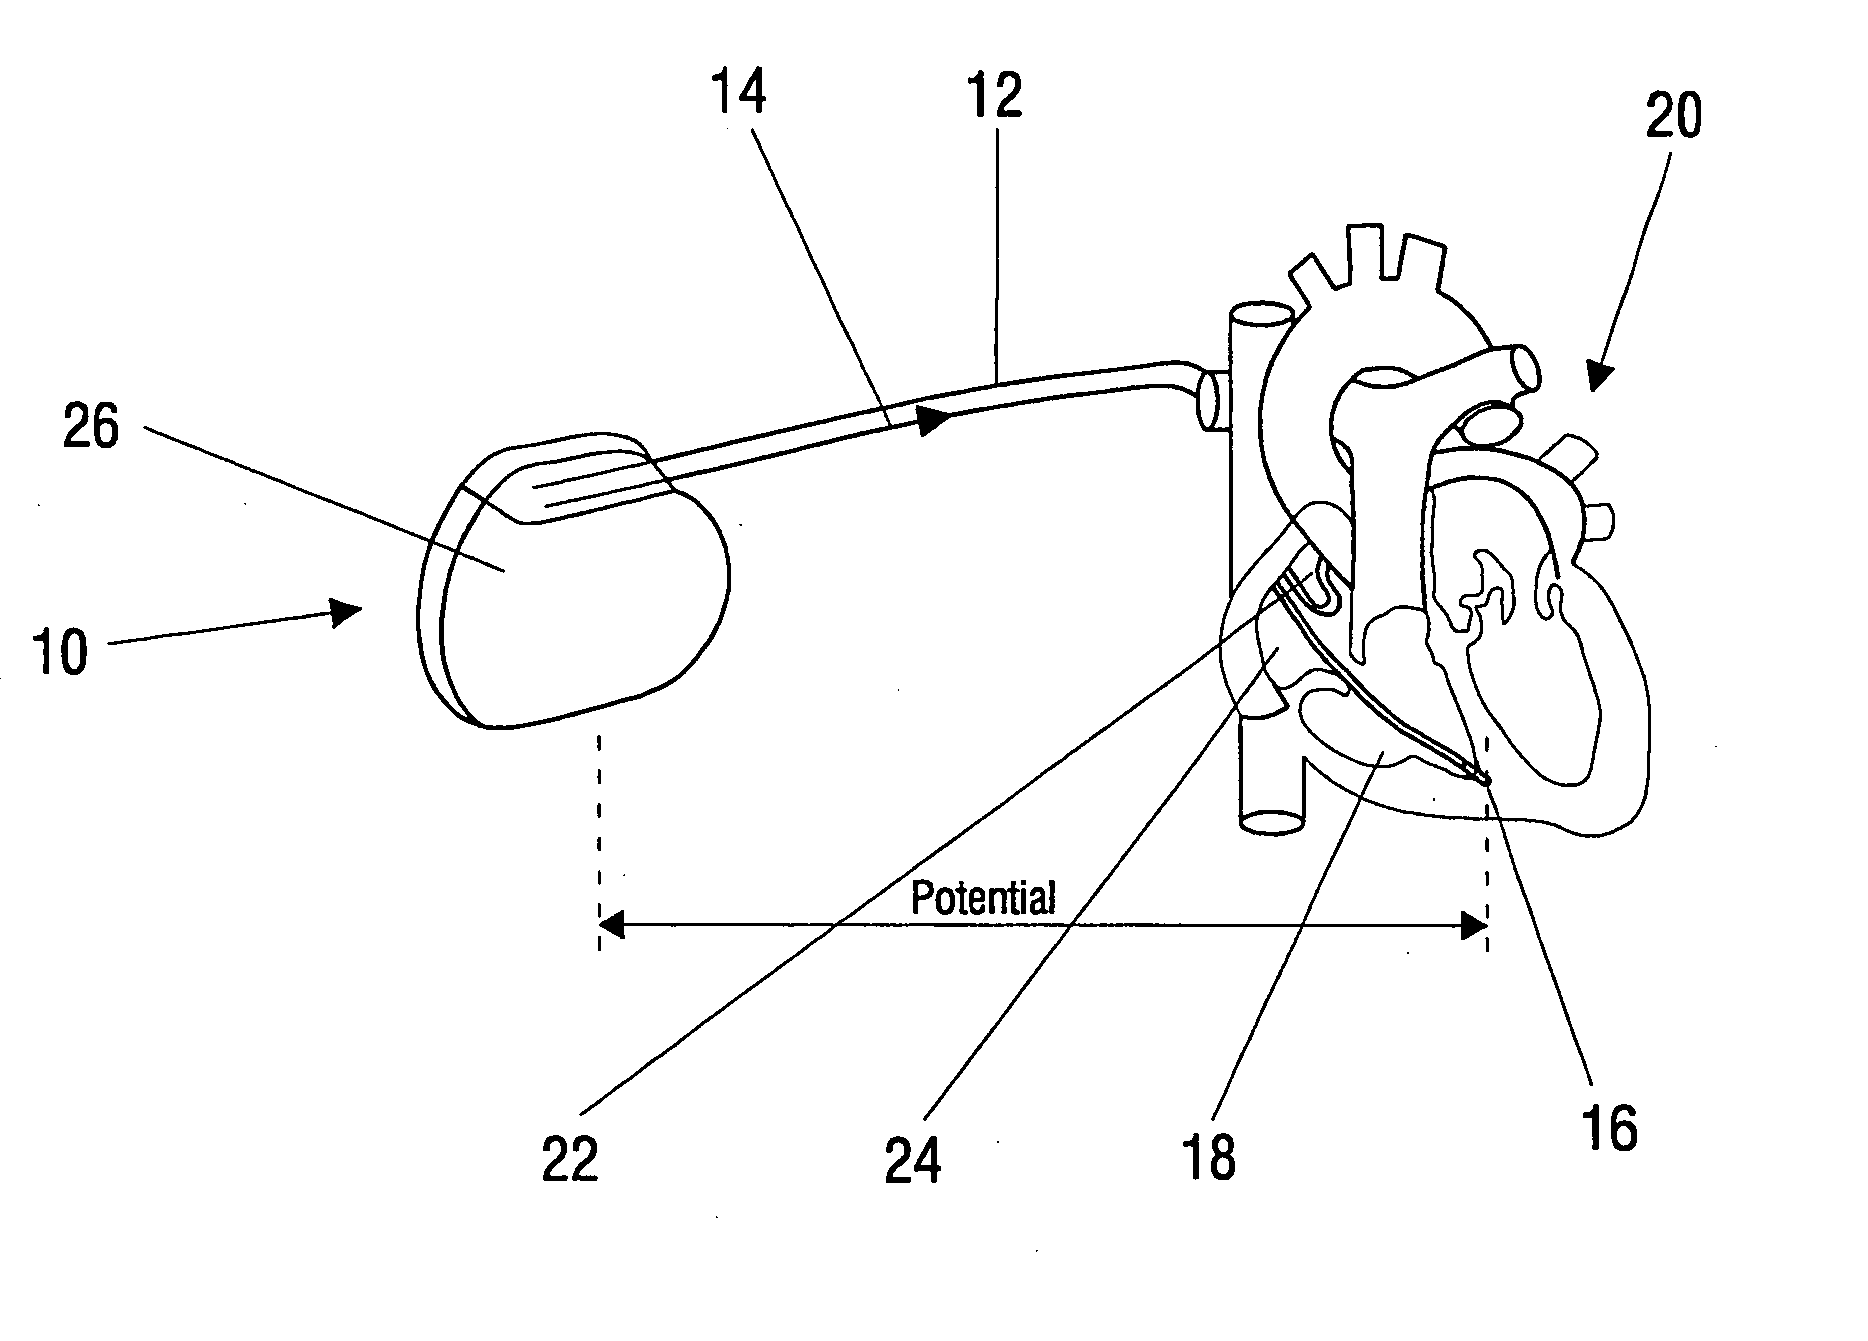 Electrotherapy device